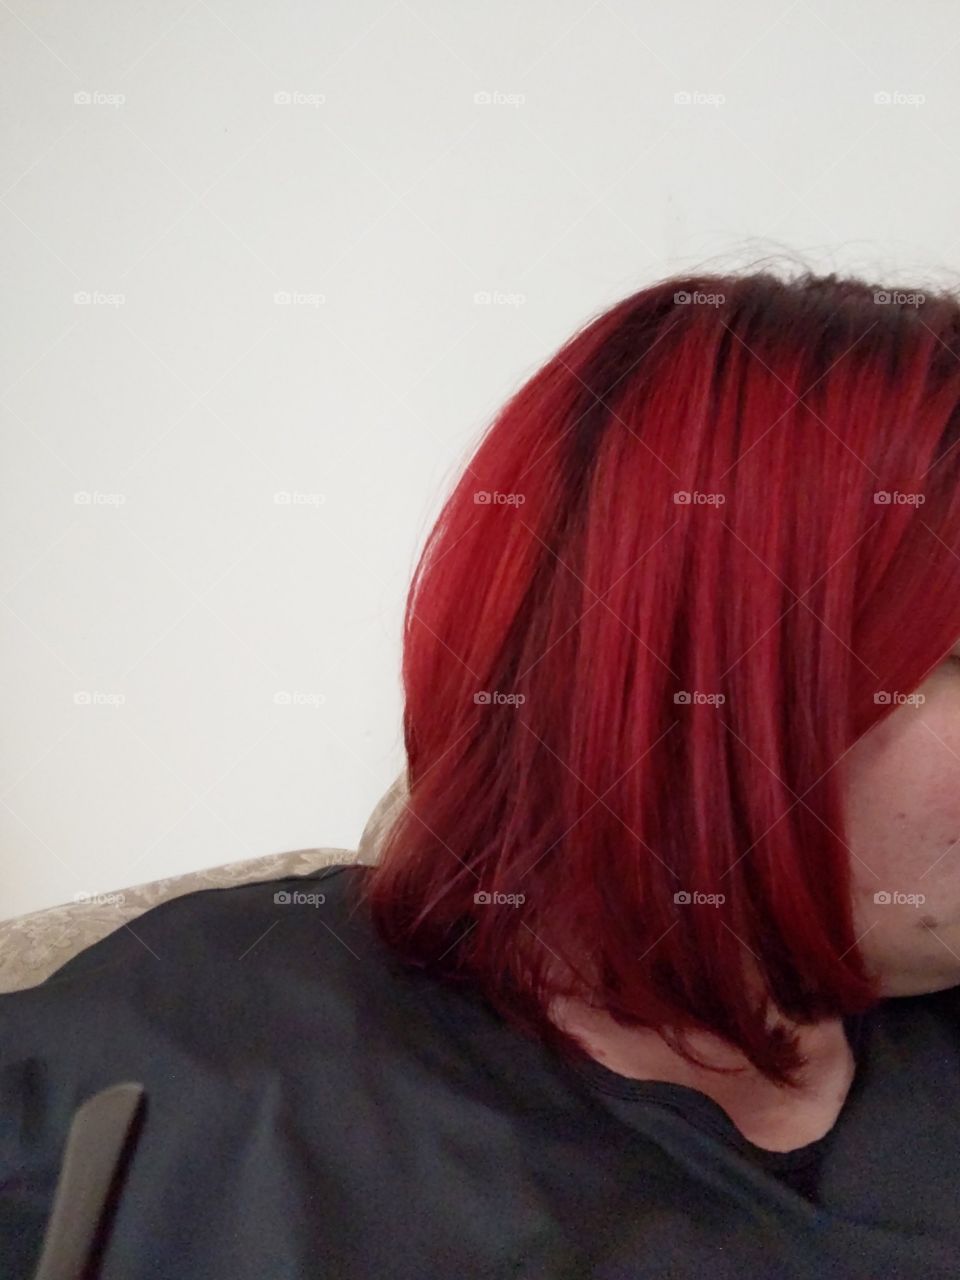 Hot, Red Hair. July 2019.